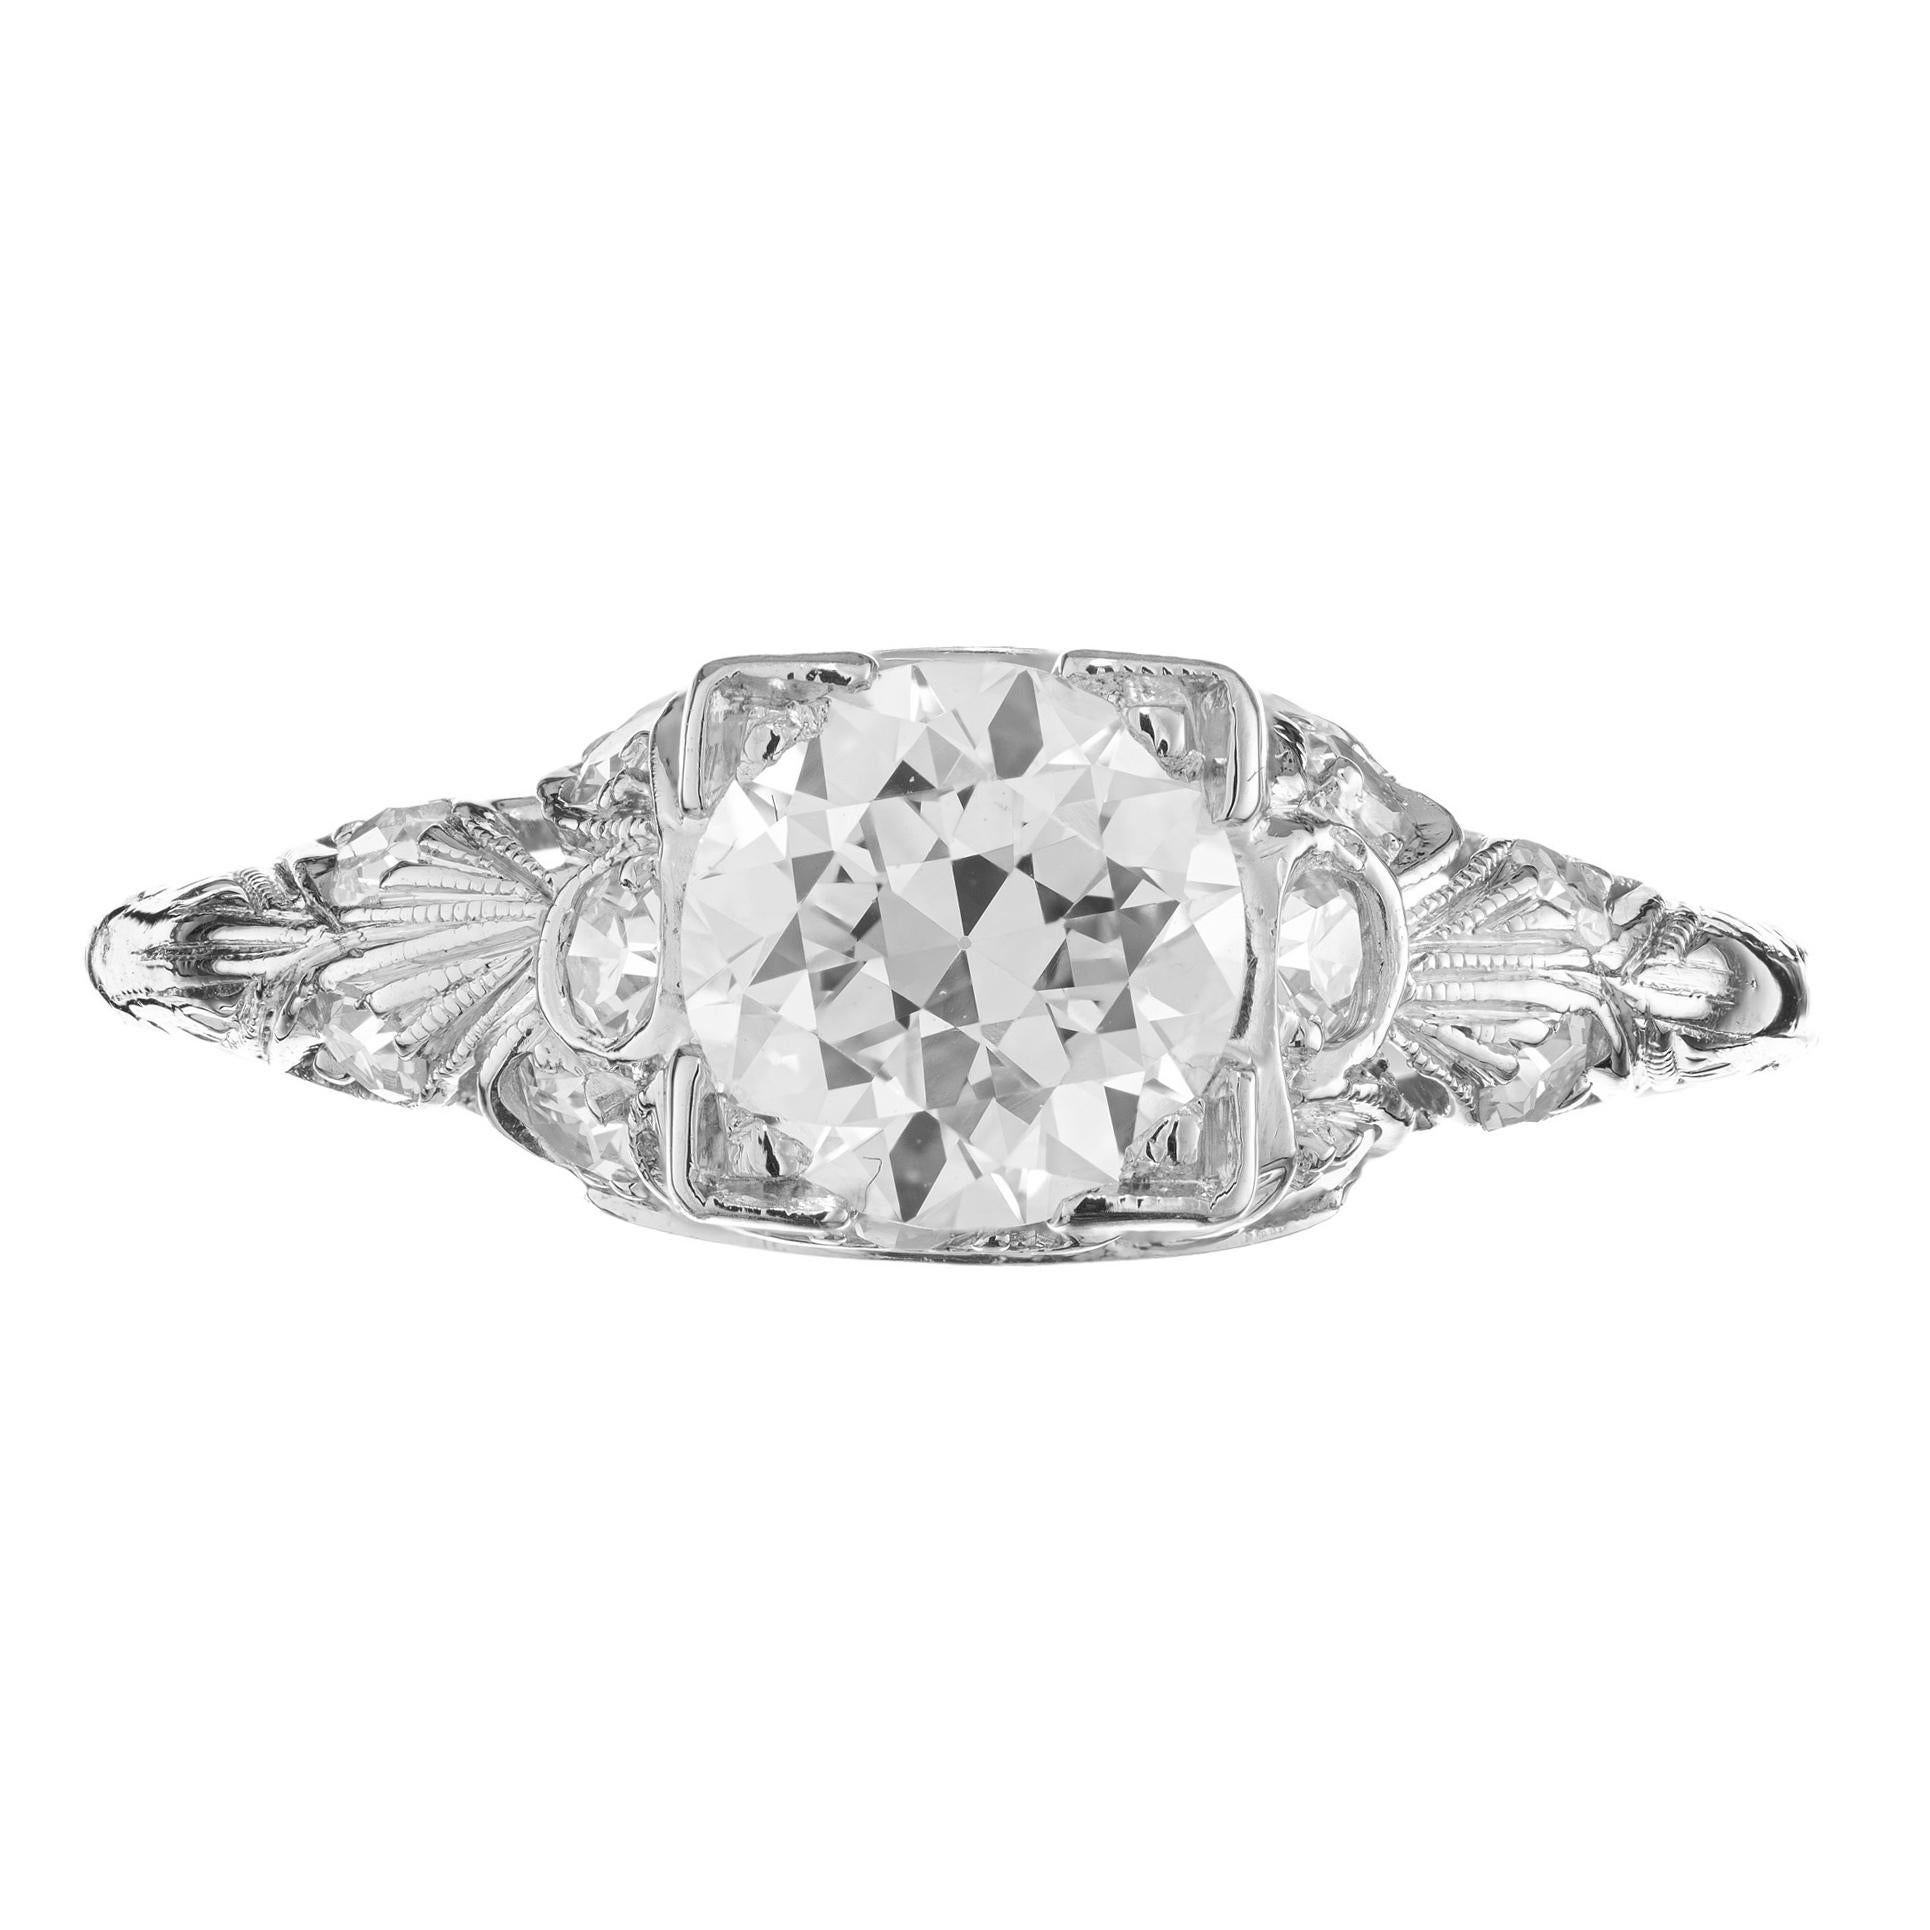 Original 1930's Art Deco diamond engagement ring. This ring begins with a dazzling .85ct round brilliant cut center diamond. Mounted in a platinum setting and accented by 10 single cut diamonds. The GIA has certified the diamond as G, near colorless